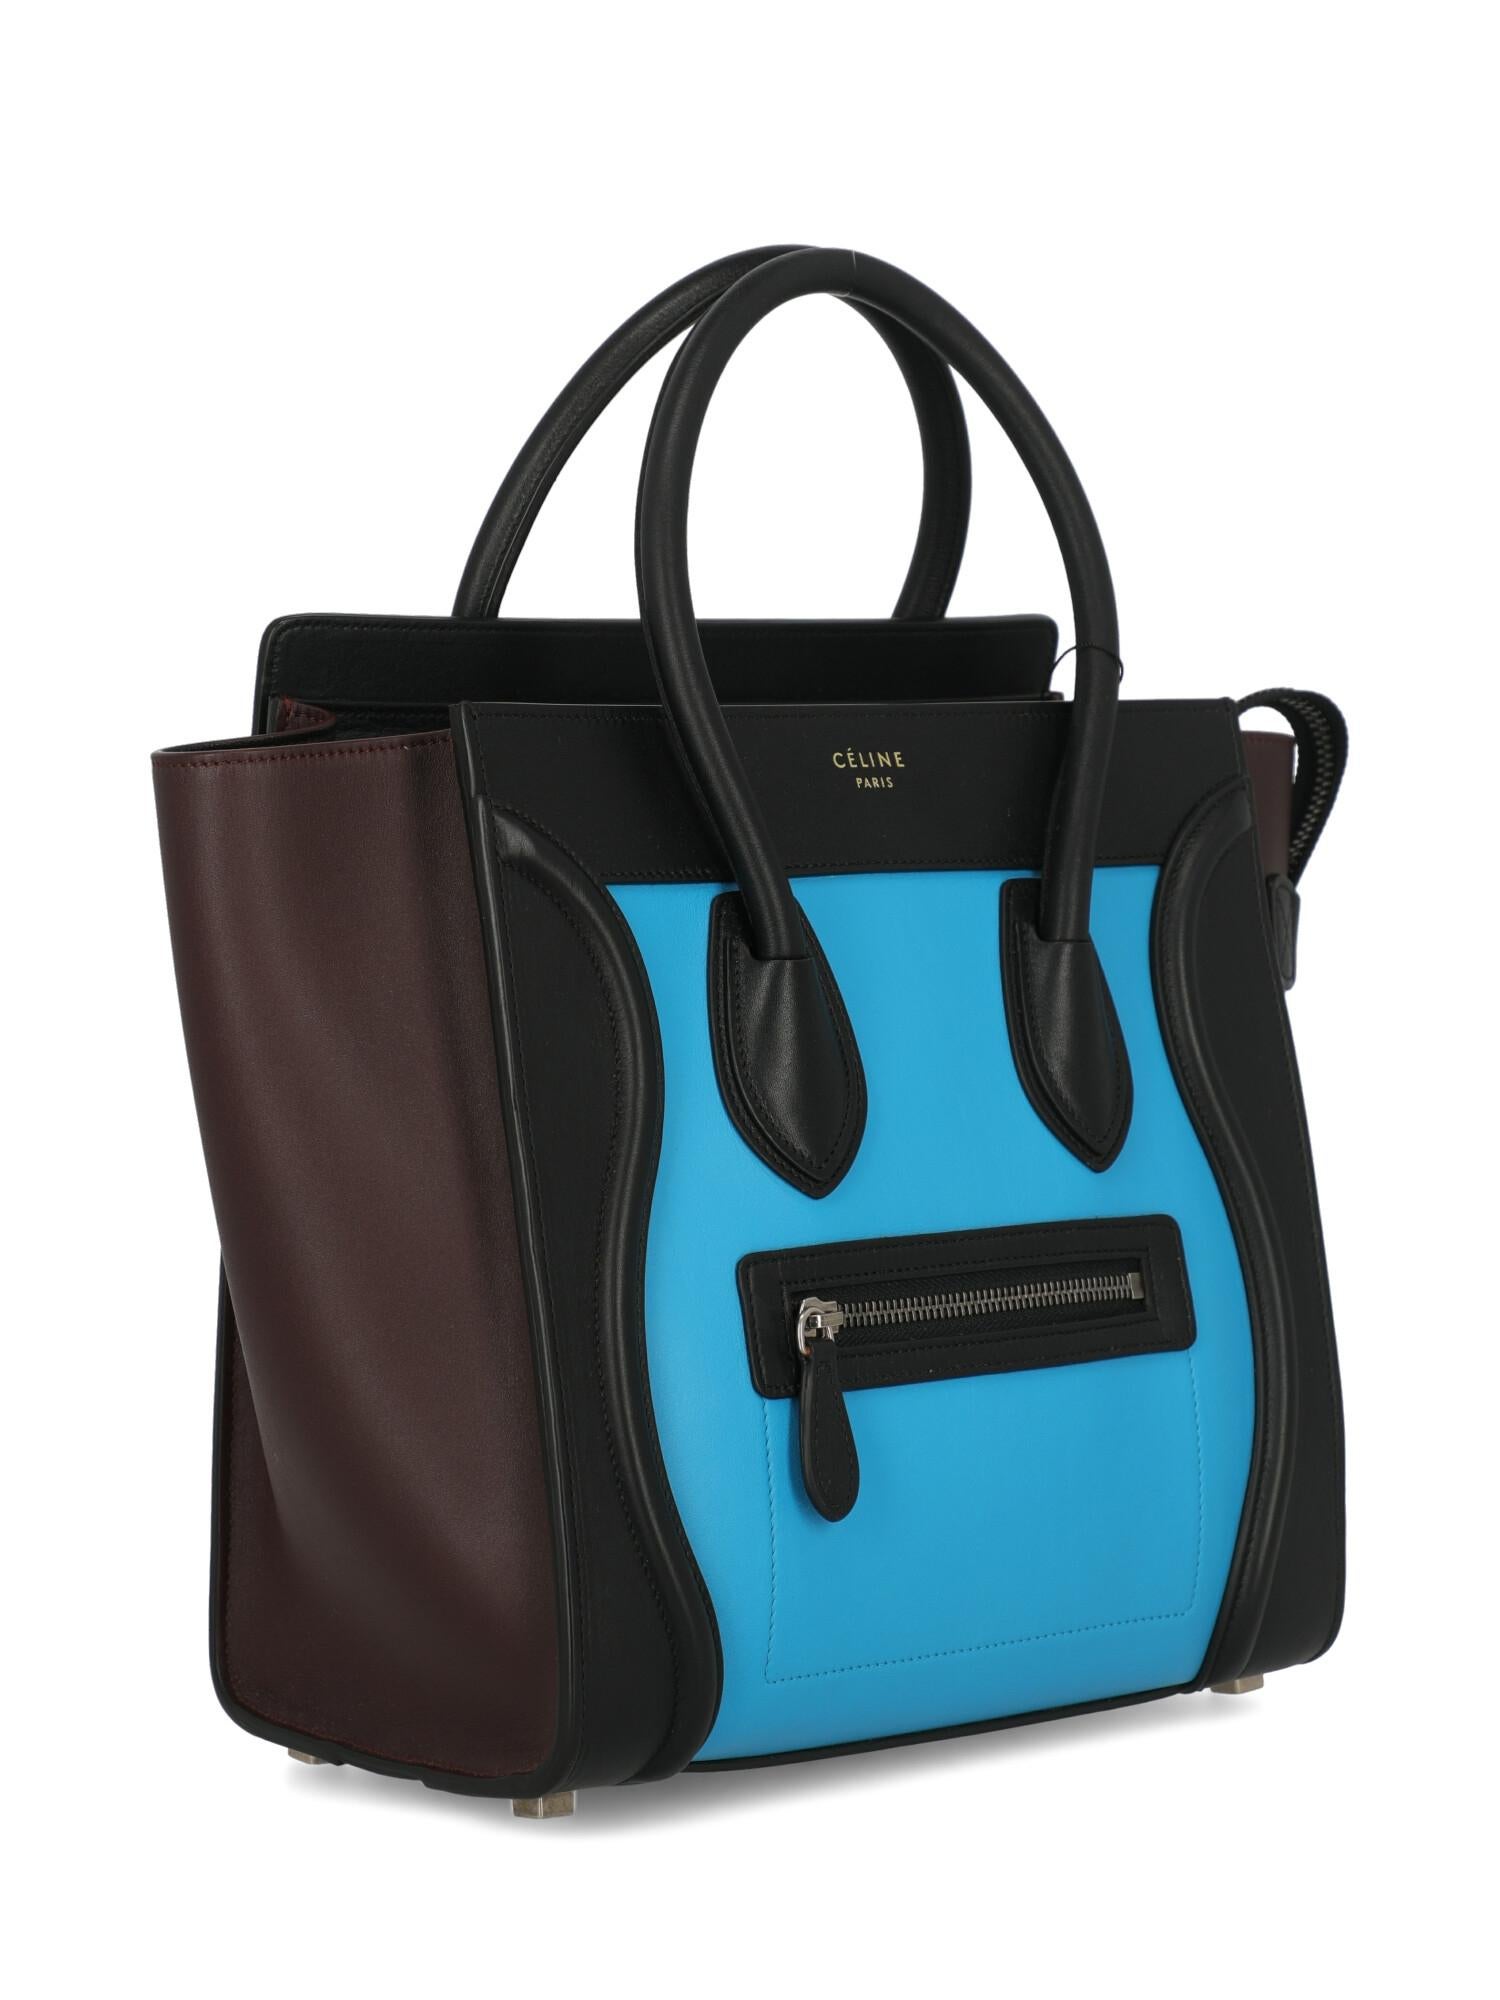 Celine Women's Handbag Luggage Black/Blue/Burgundy Leather In Excellent Condition For Sale In Milan, IT